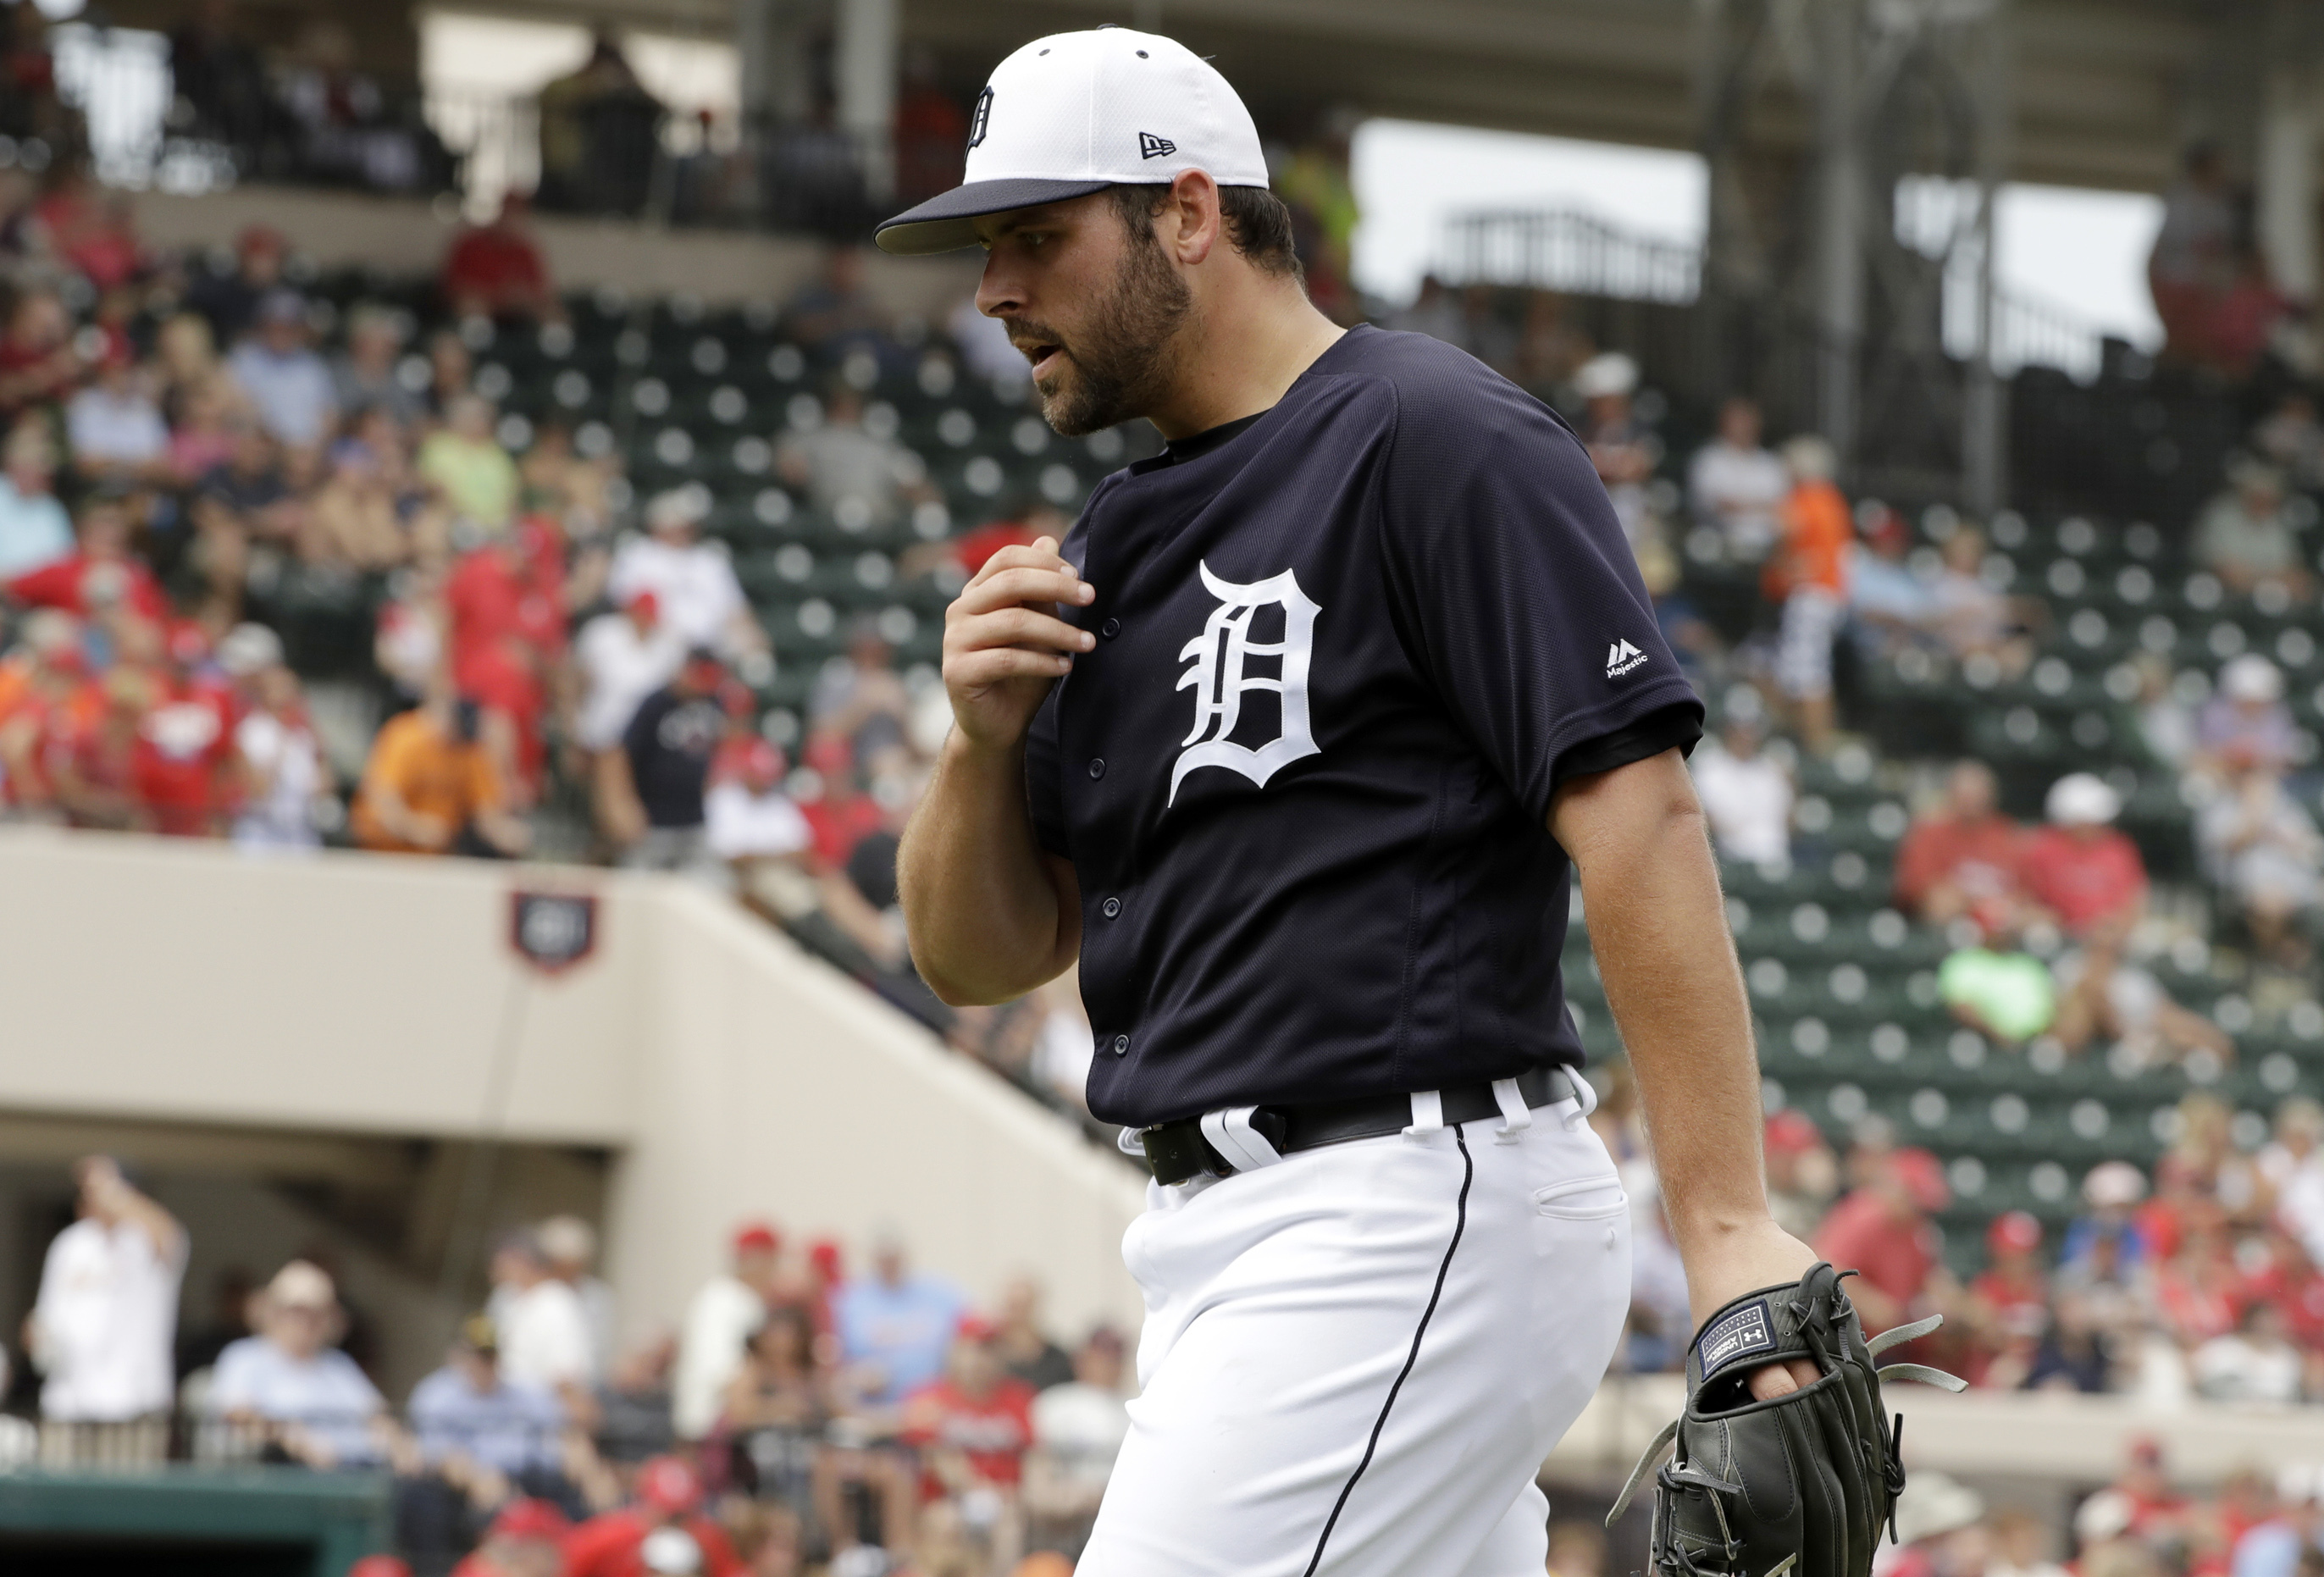 Tigers RHP Michael Fulmer may need Tommy John surgery